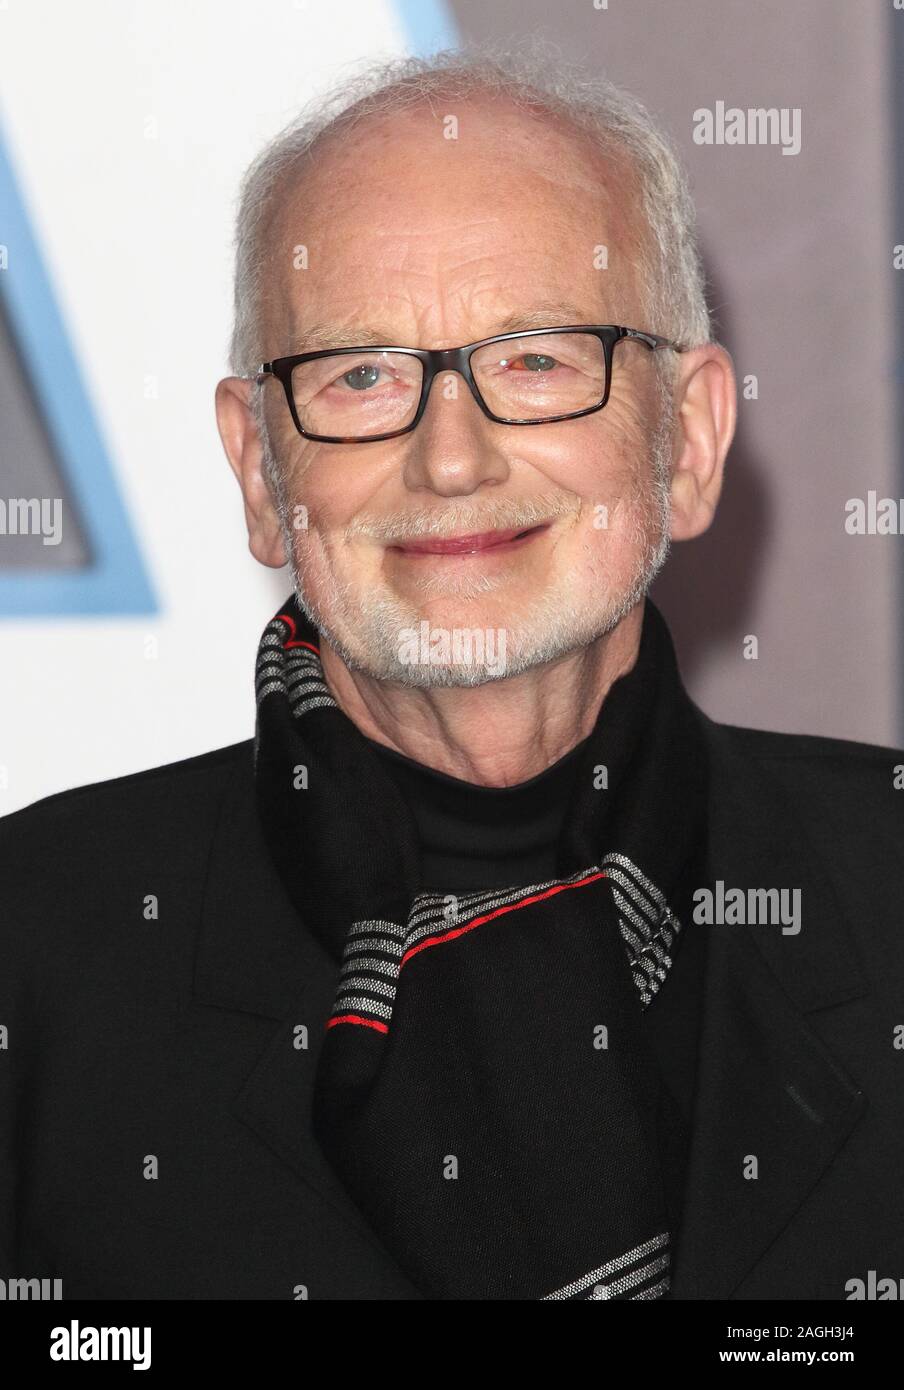 London, UK. 18th Dec, 2019. LONDON, UNITED KINGDOM - DECEMBER 18 2019: Ian McDiarmid attends the 'Star Wars: The Rise of Skywalker' European Premiere at Cineworld Leicester Square in London. Credit: SOPA Images Limited/Alamy Live News Stock Photo